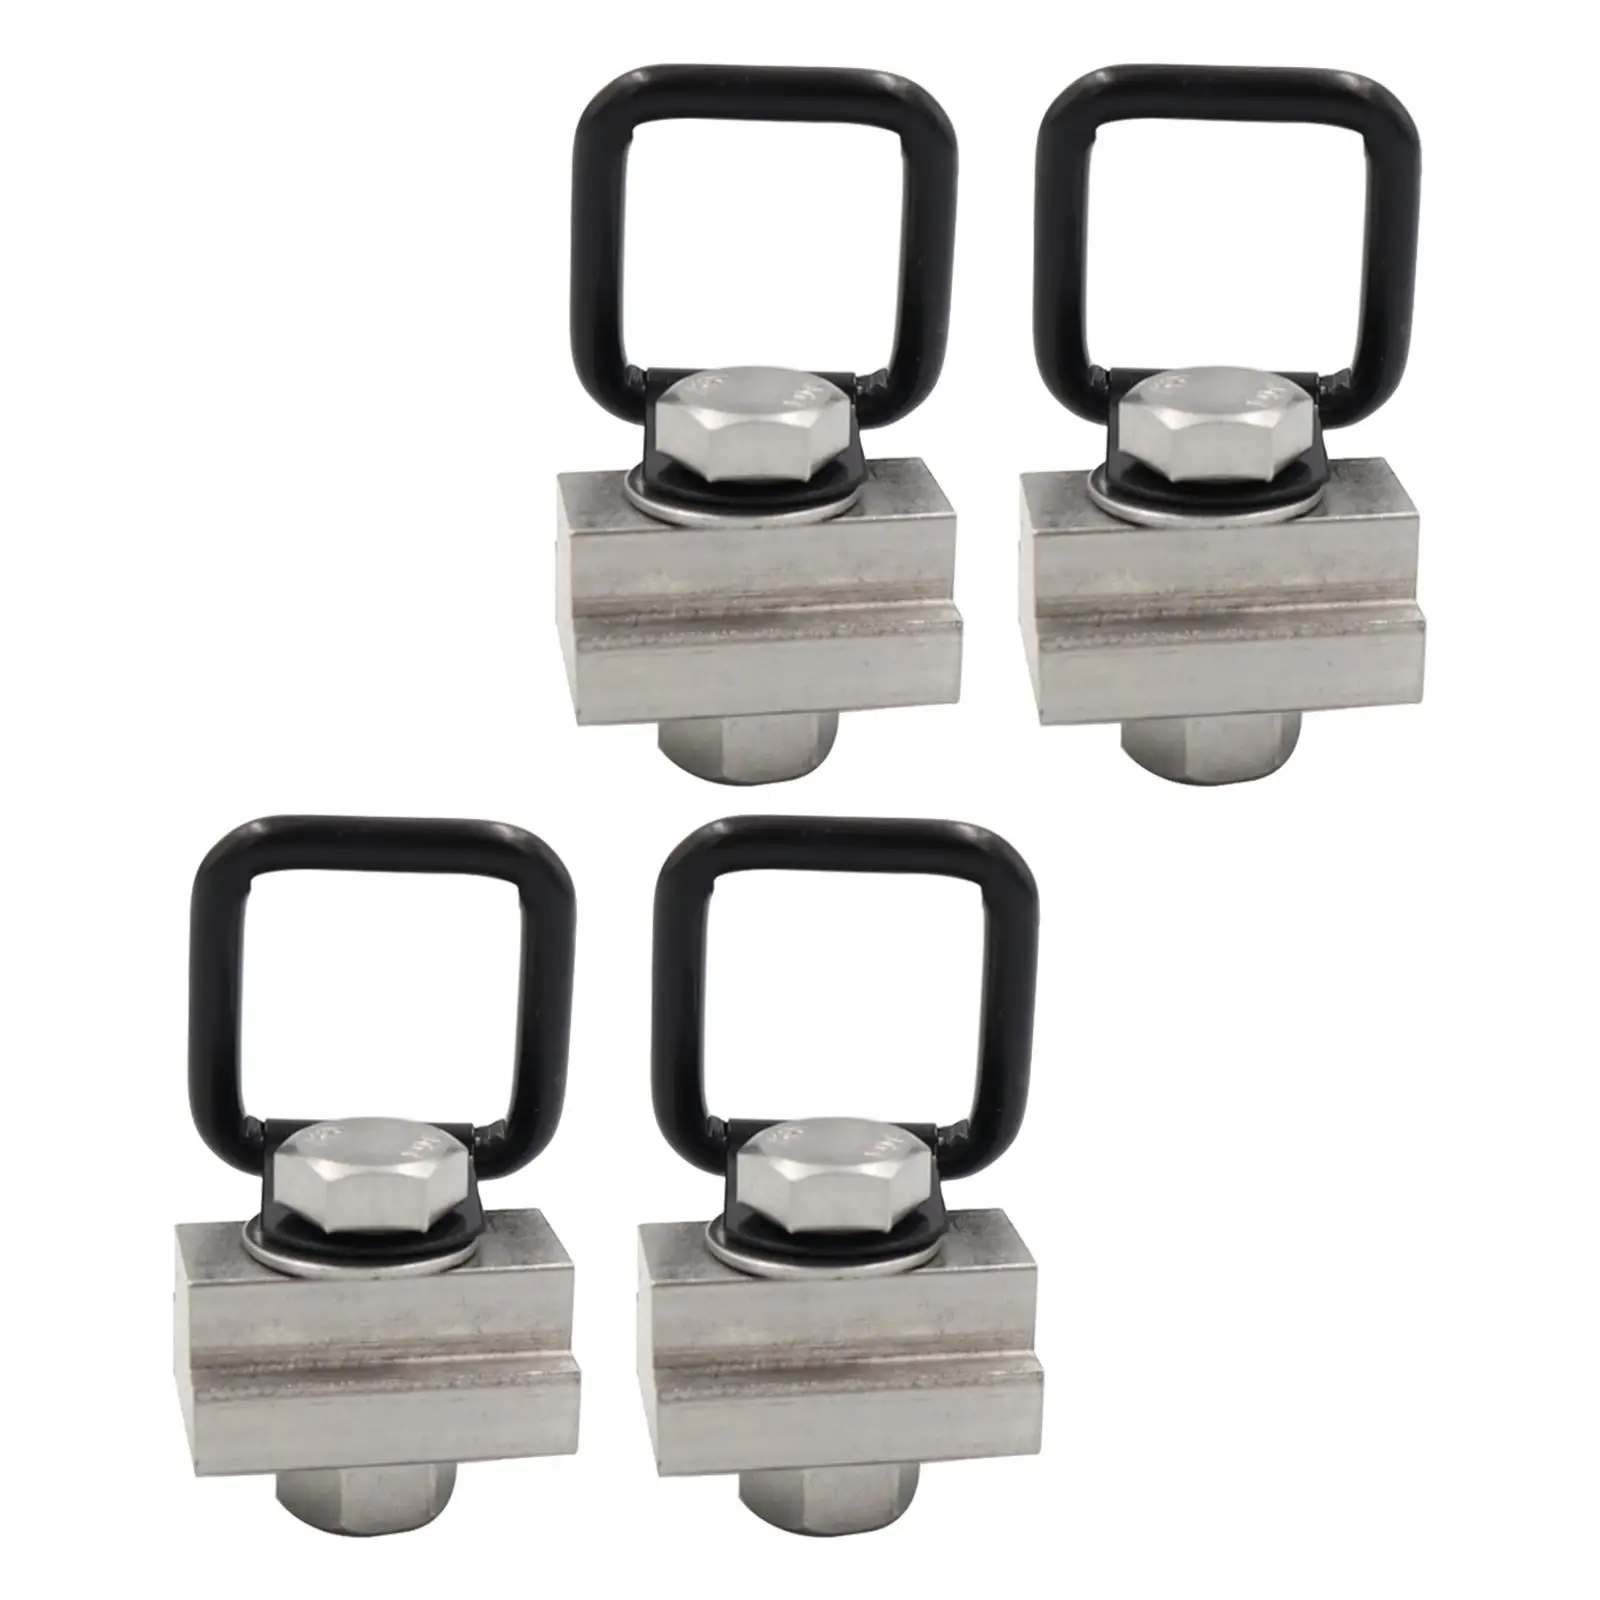 4x Car Bed Rail T Slot Nuts Kit with 3/8